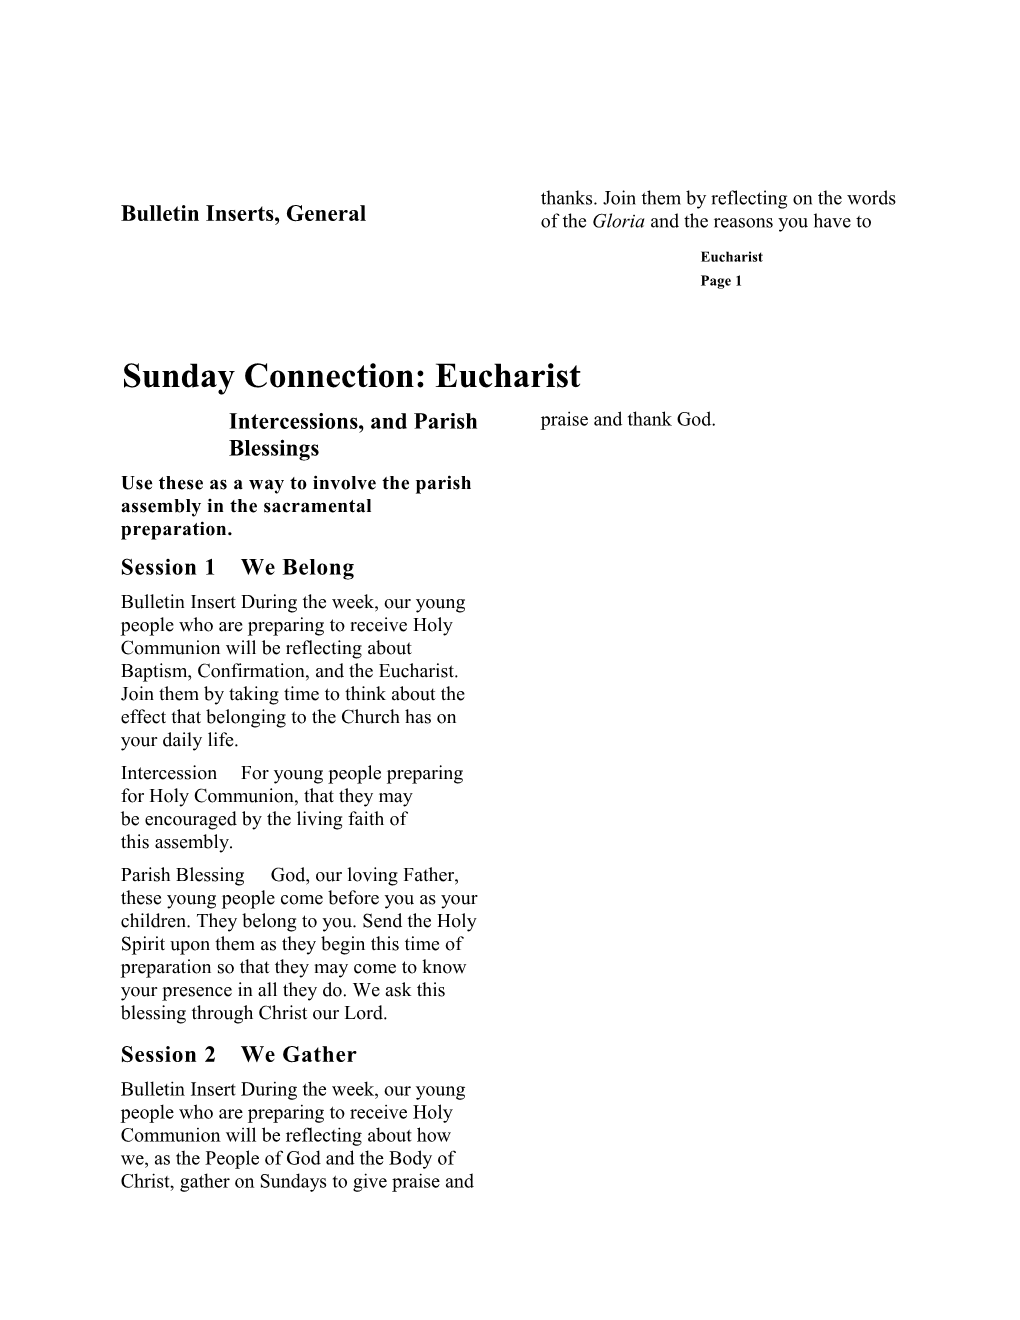 Bulletin Inserts, General Intercessions, and Parish Blessings